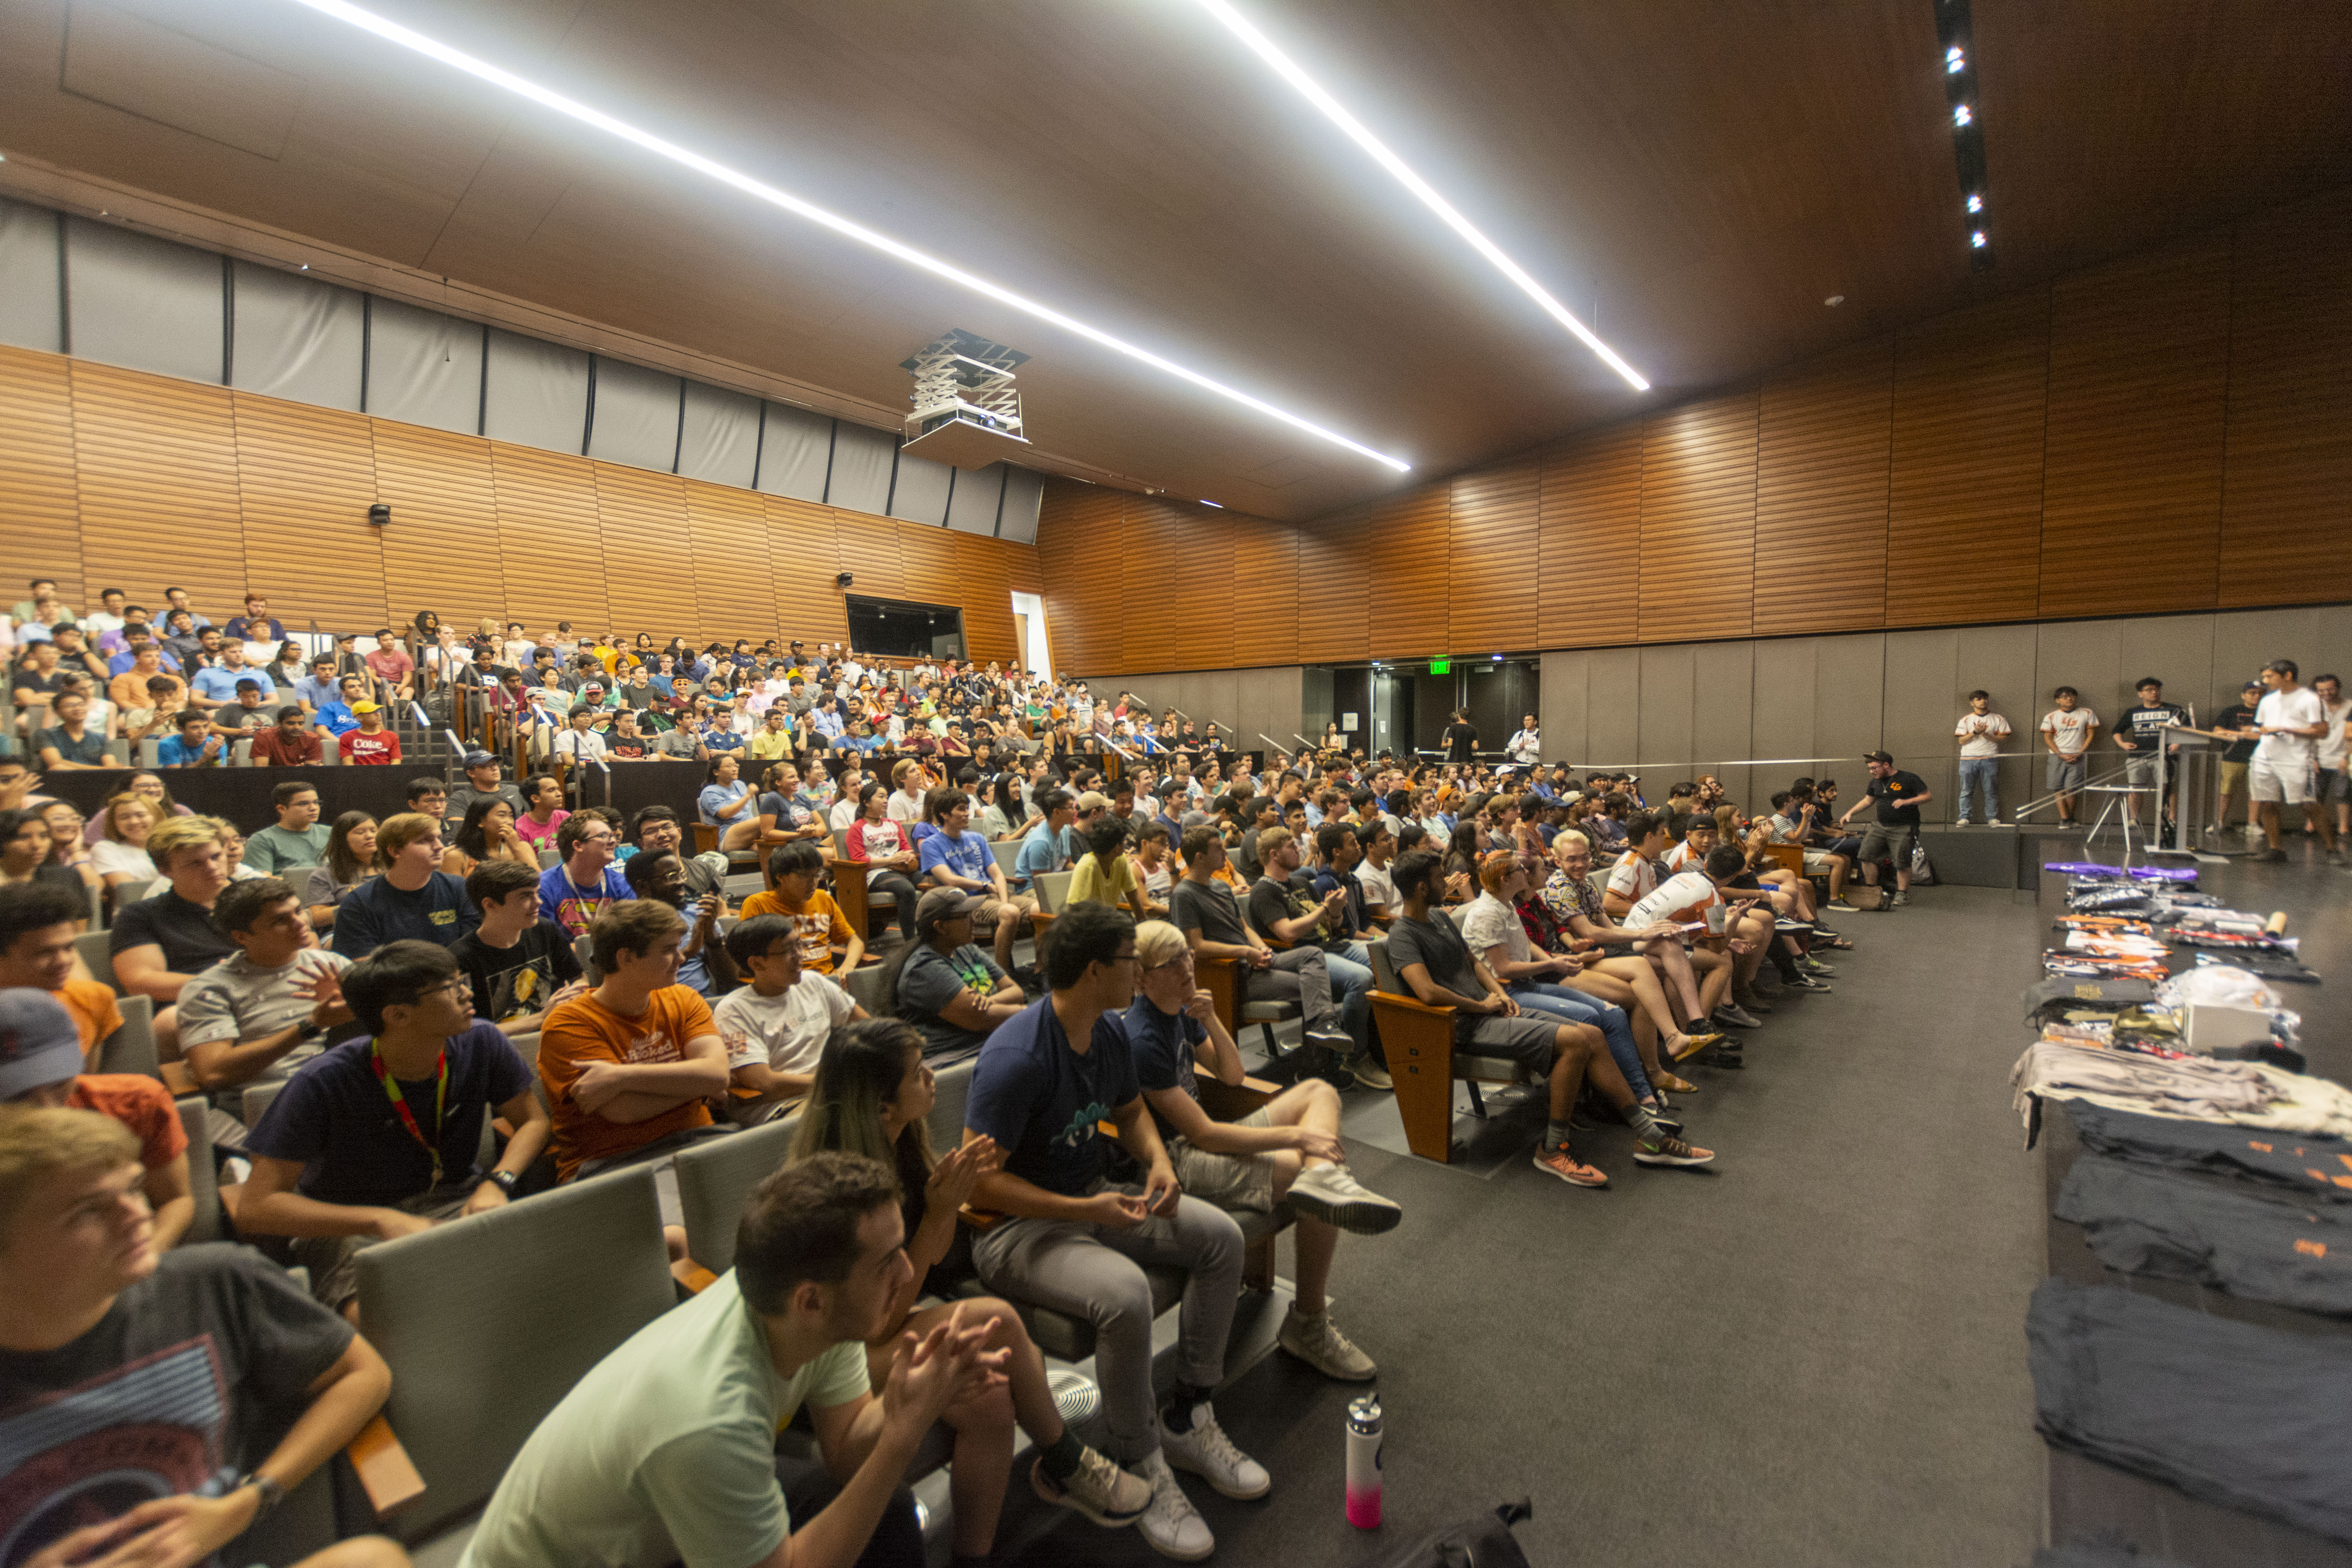 An auditorium full of college students. Every seat in the room is occupied. Some people stand to the side and on the stairs.